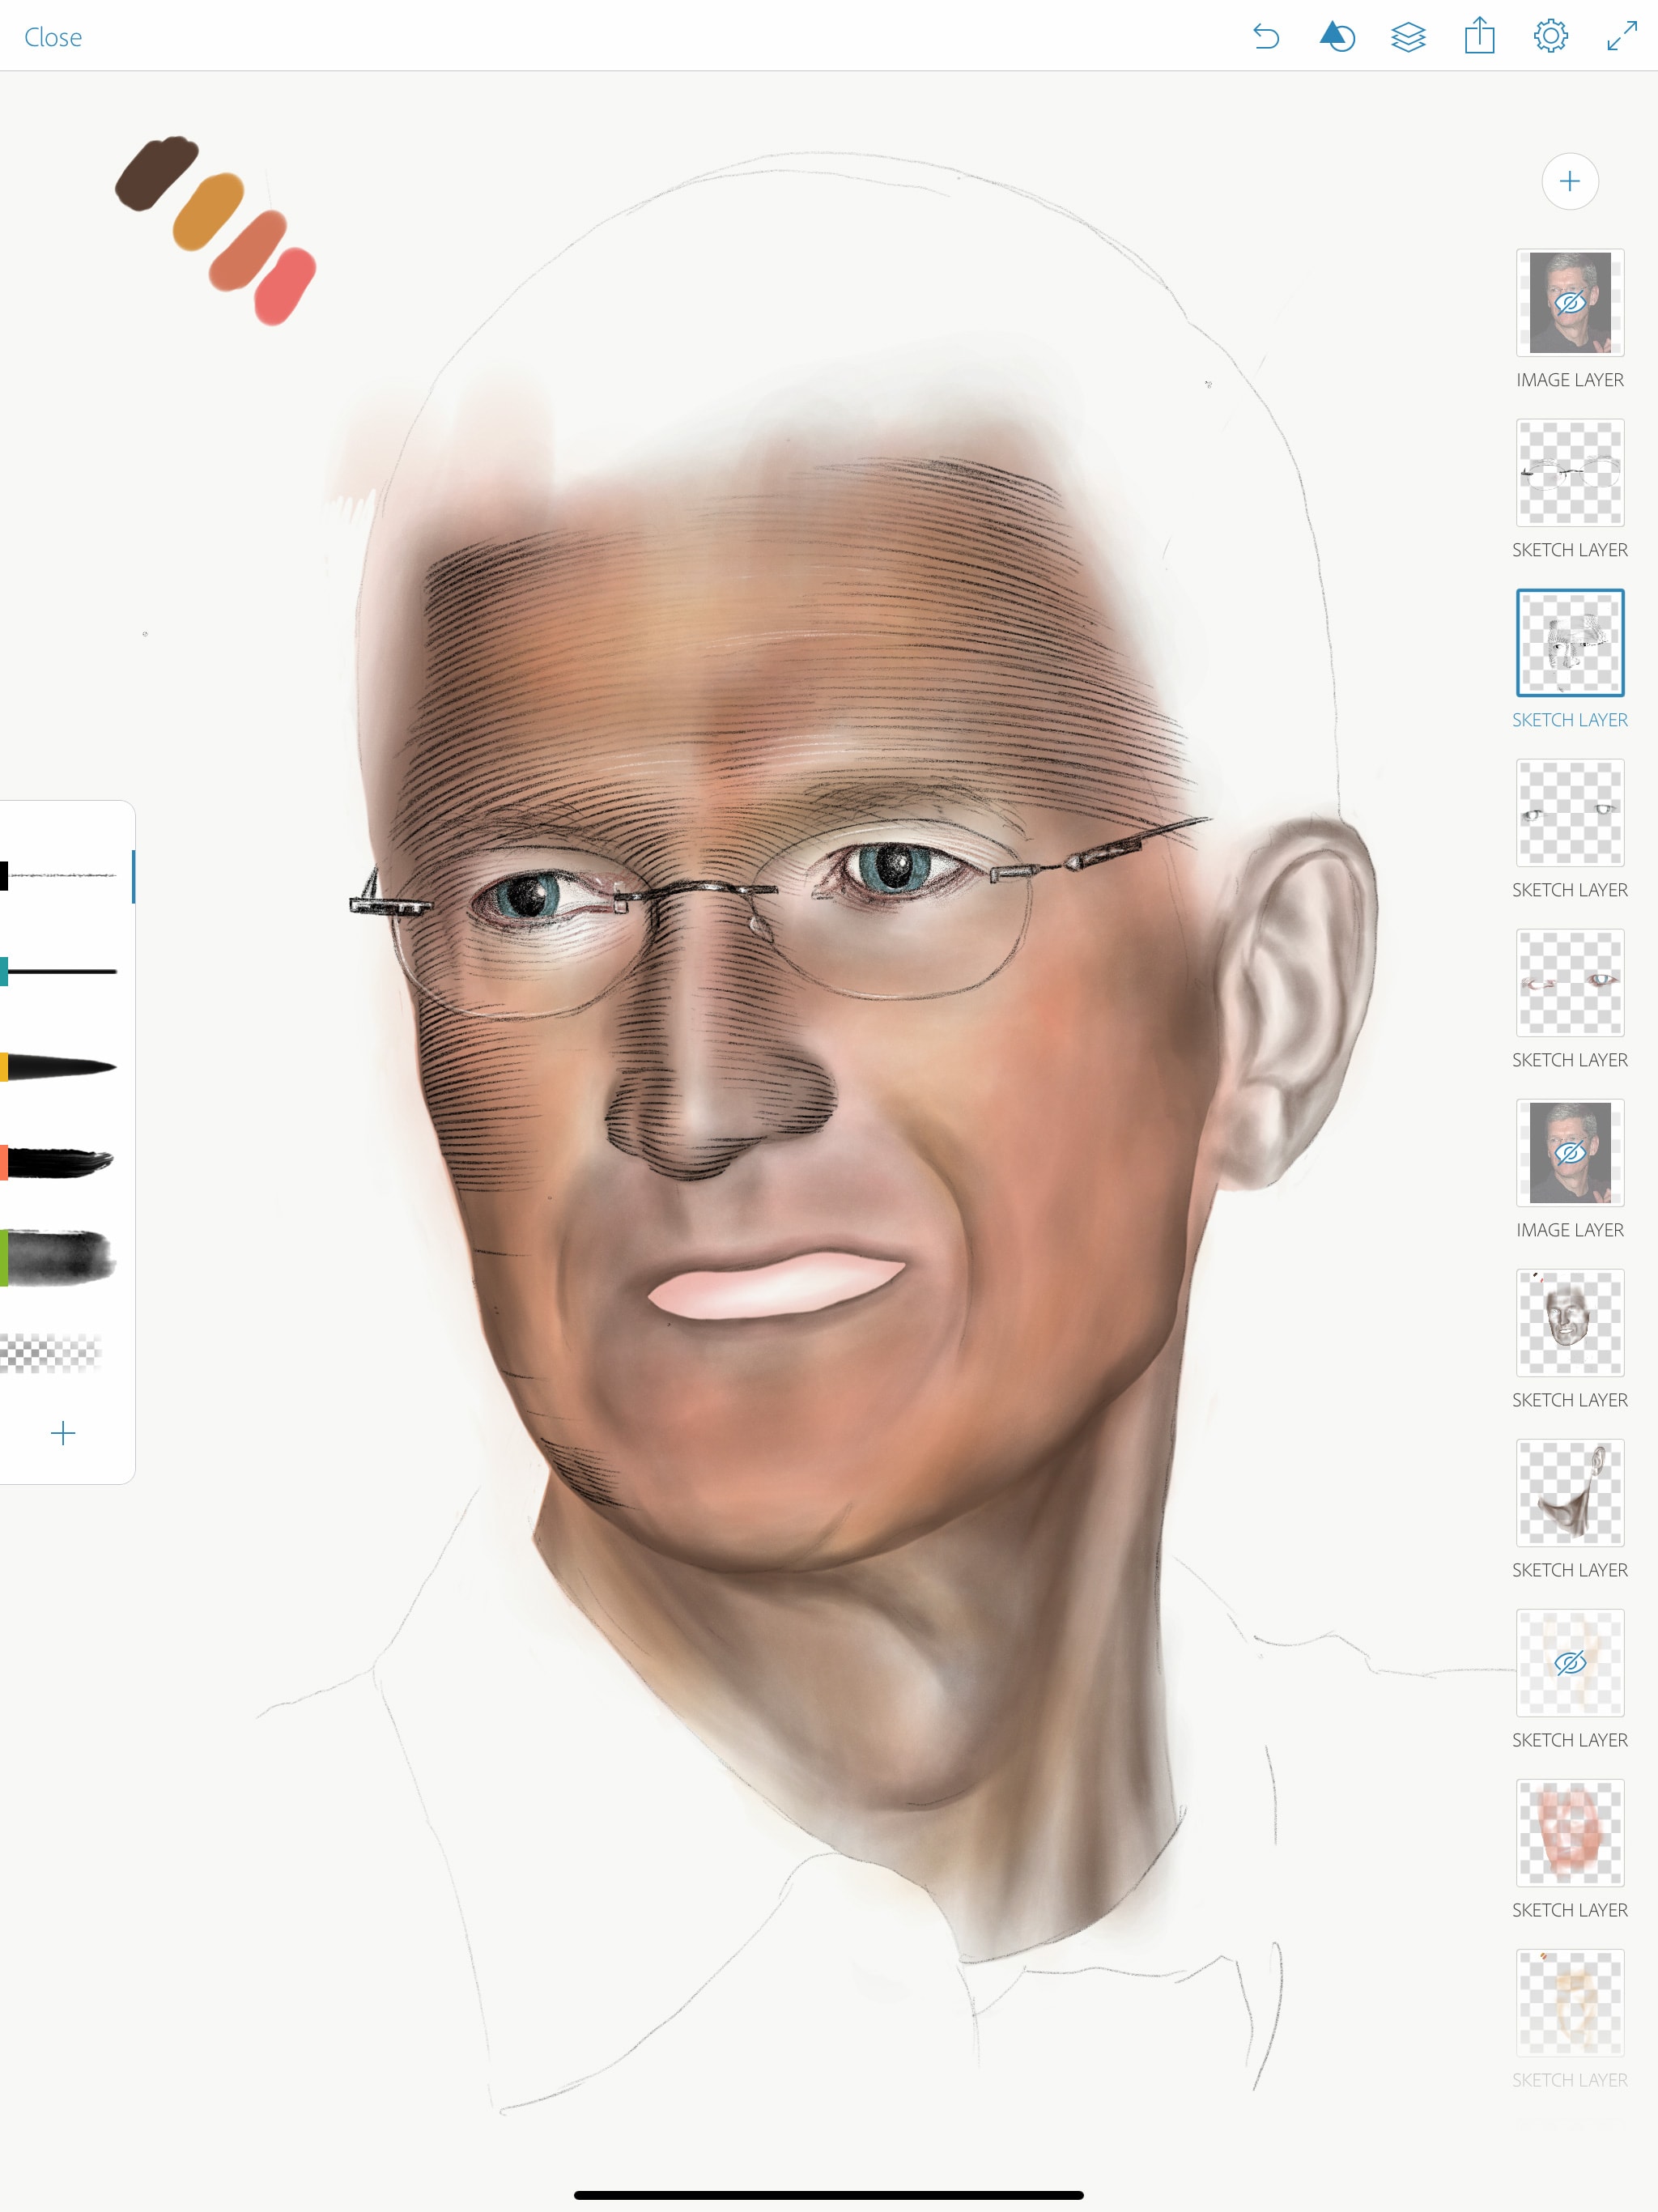 Drawing portraits with Apple PenciL: Step 4: Add the details